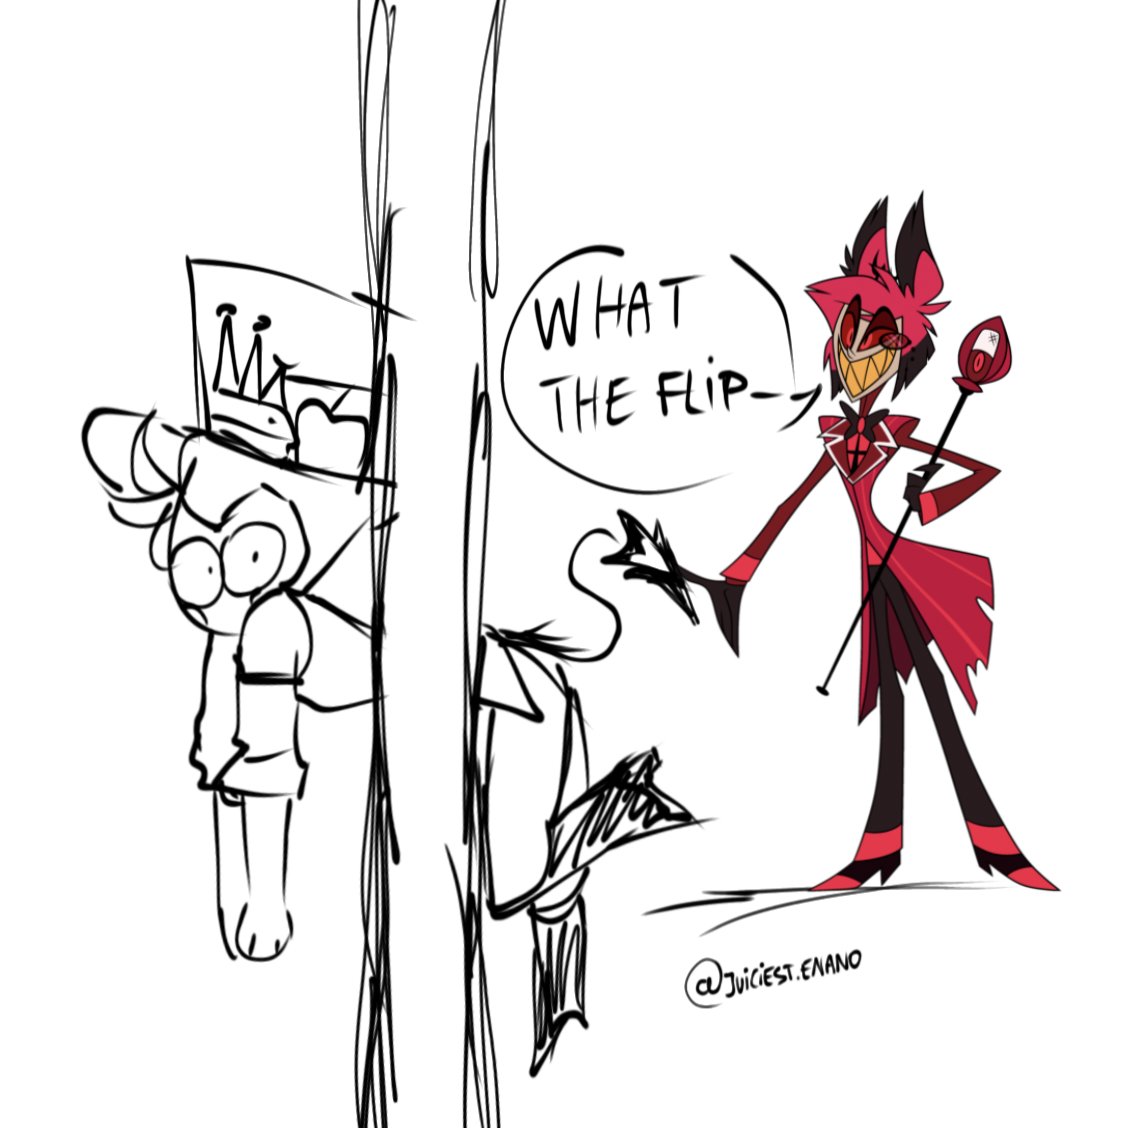 Stop asking for oiled and tied up Lucifer stuck in the wall begging and crying for Alastor to 'help him out' EKHEM-- by banging him- 🗿 

#radioapple #radioapplensfw #appleradio #LuciferMorningstar #lucifer #LuciferxAlastor #Alastor #HazbinHotelLucifer #alastorhazbinhotel